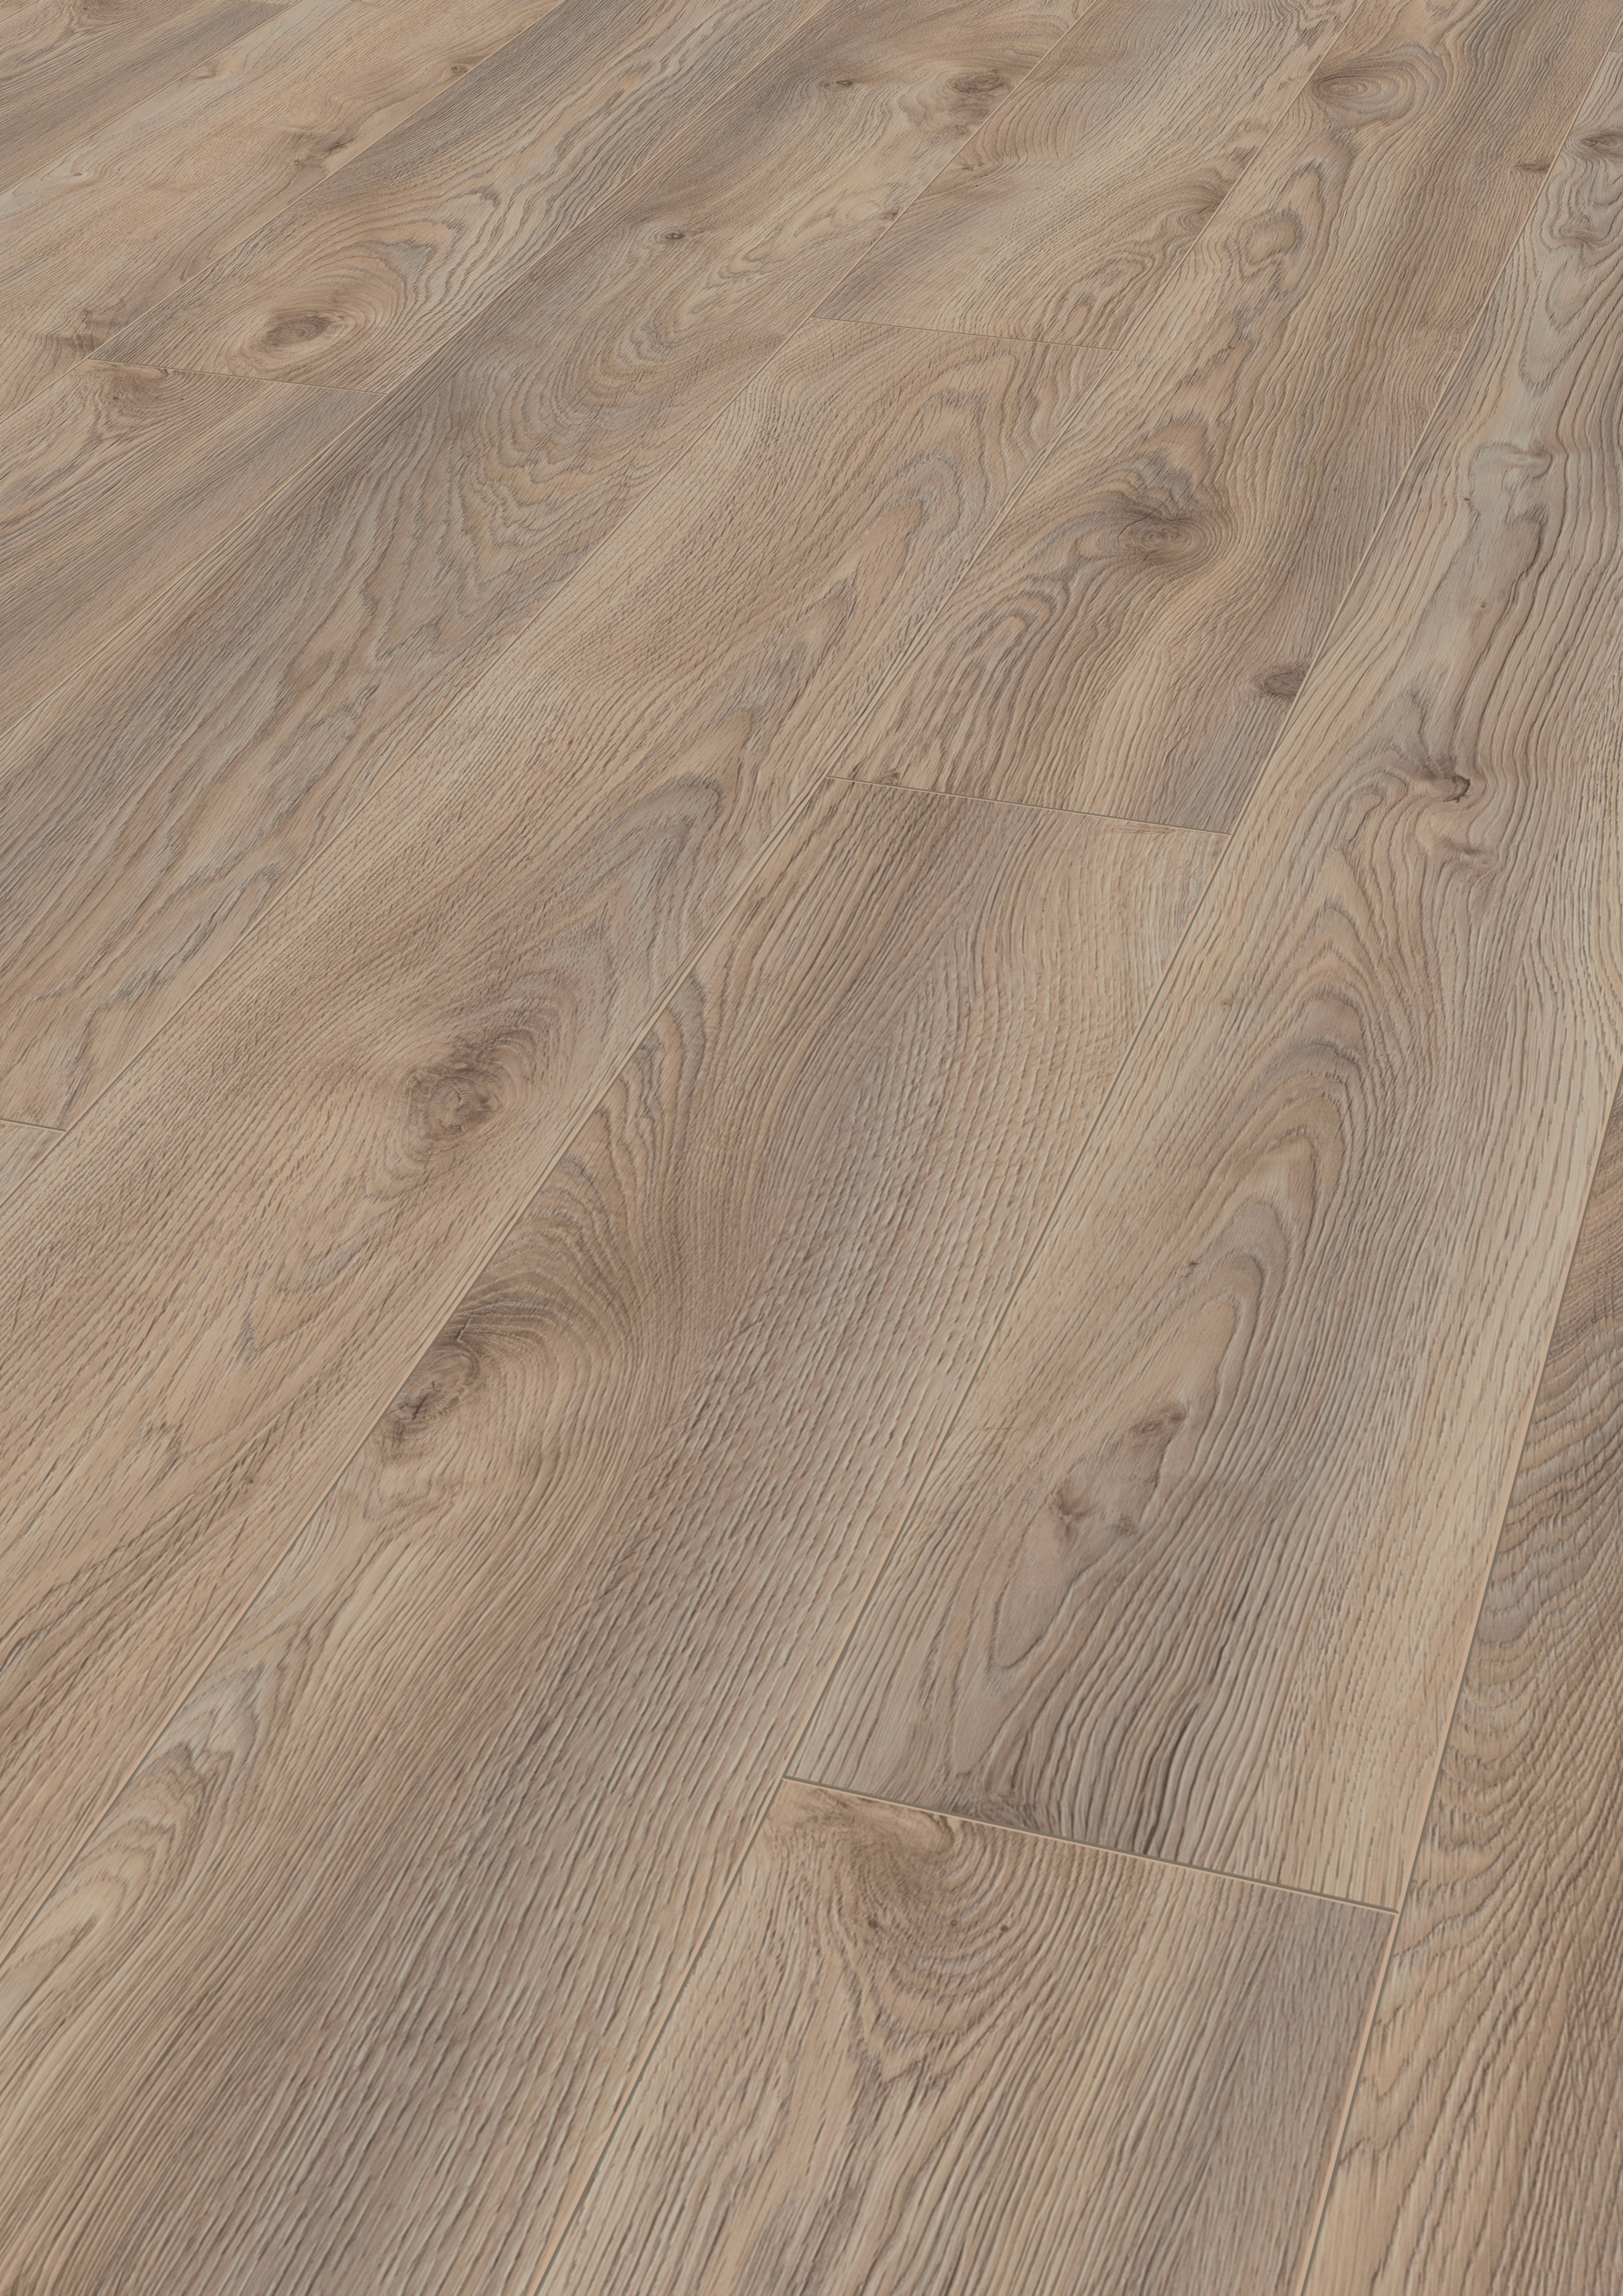 24 Wonderful Hardwood Flooring Sale In Mississauga 2022 free download hardwood flooring sale in mississauga of mammut laminate flooring in country house plank style kronotex with regard to download picture amp